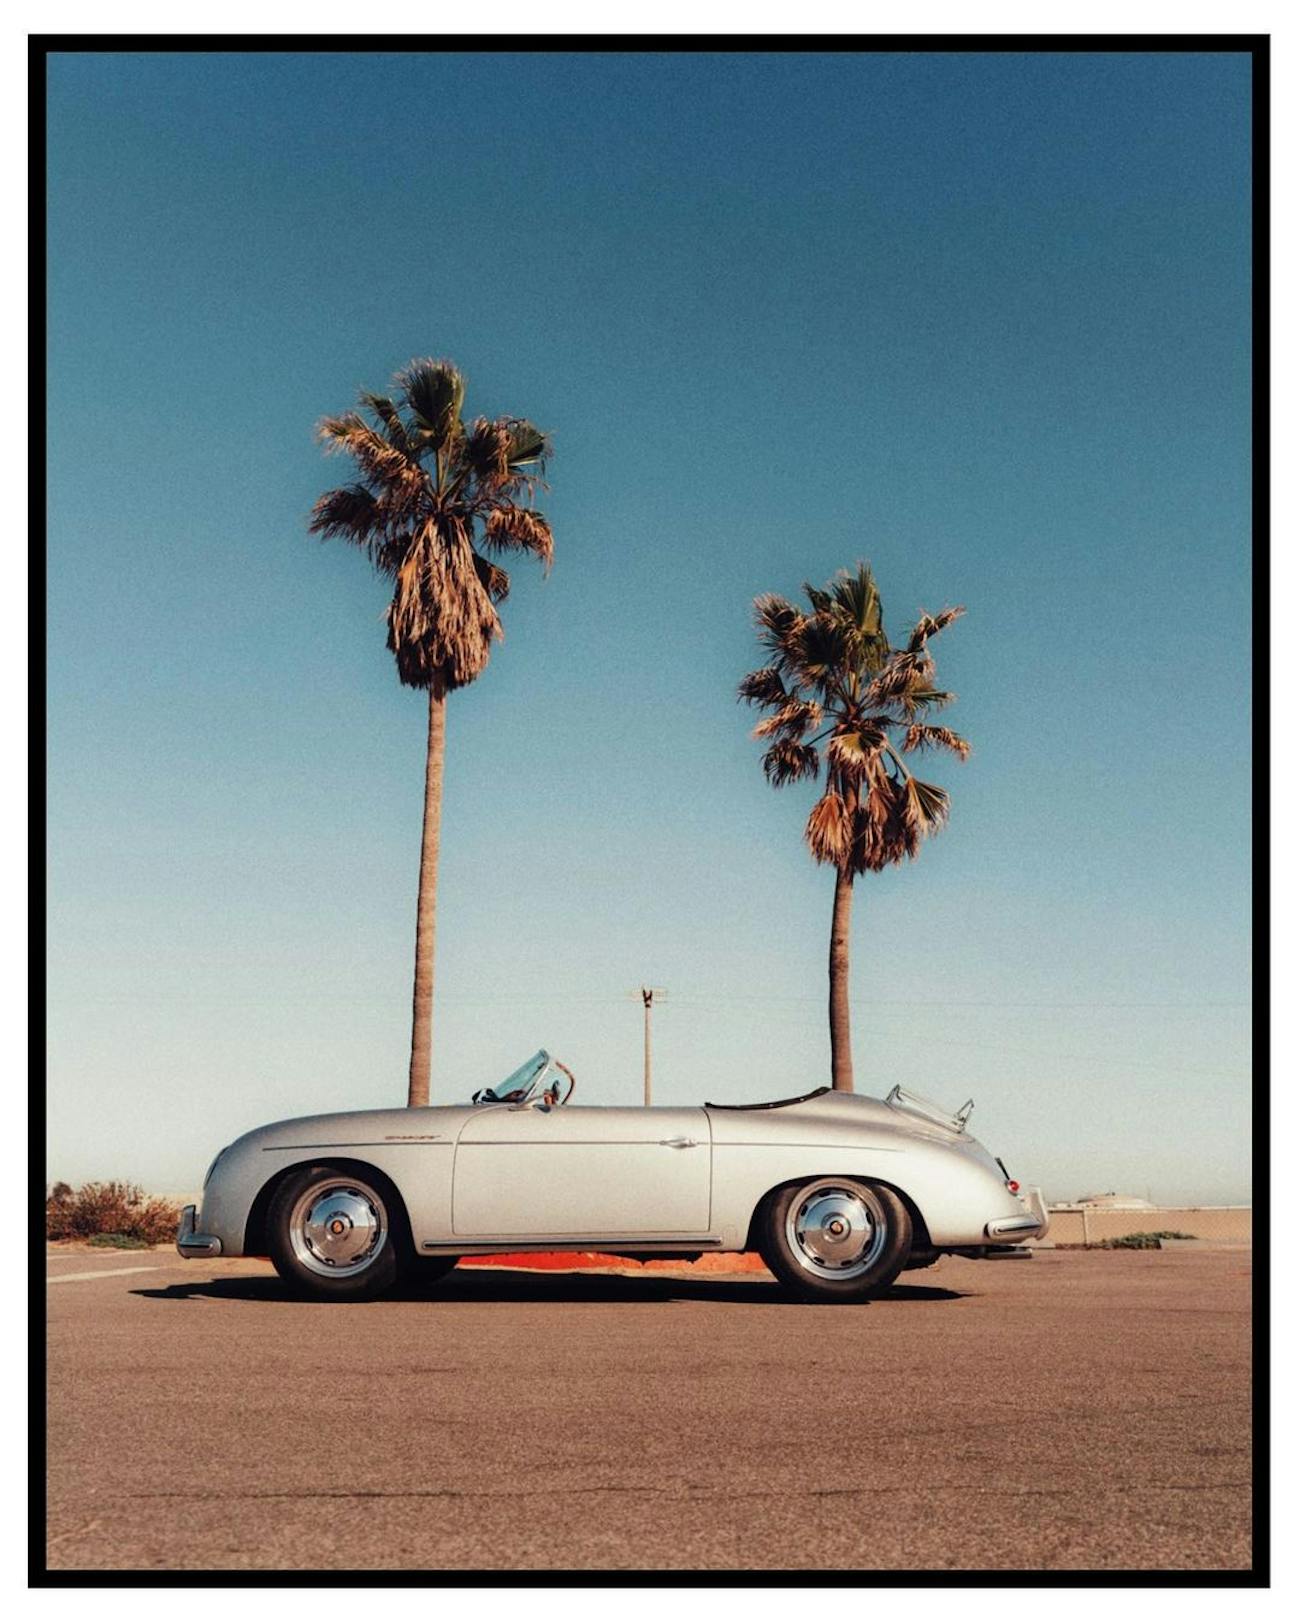 Classic Porsche in front of palm trees and under blue skies